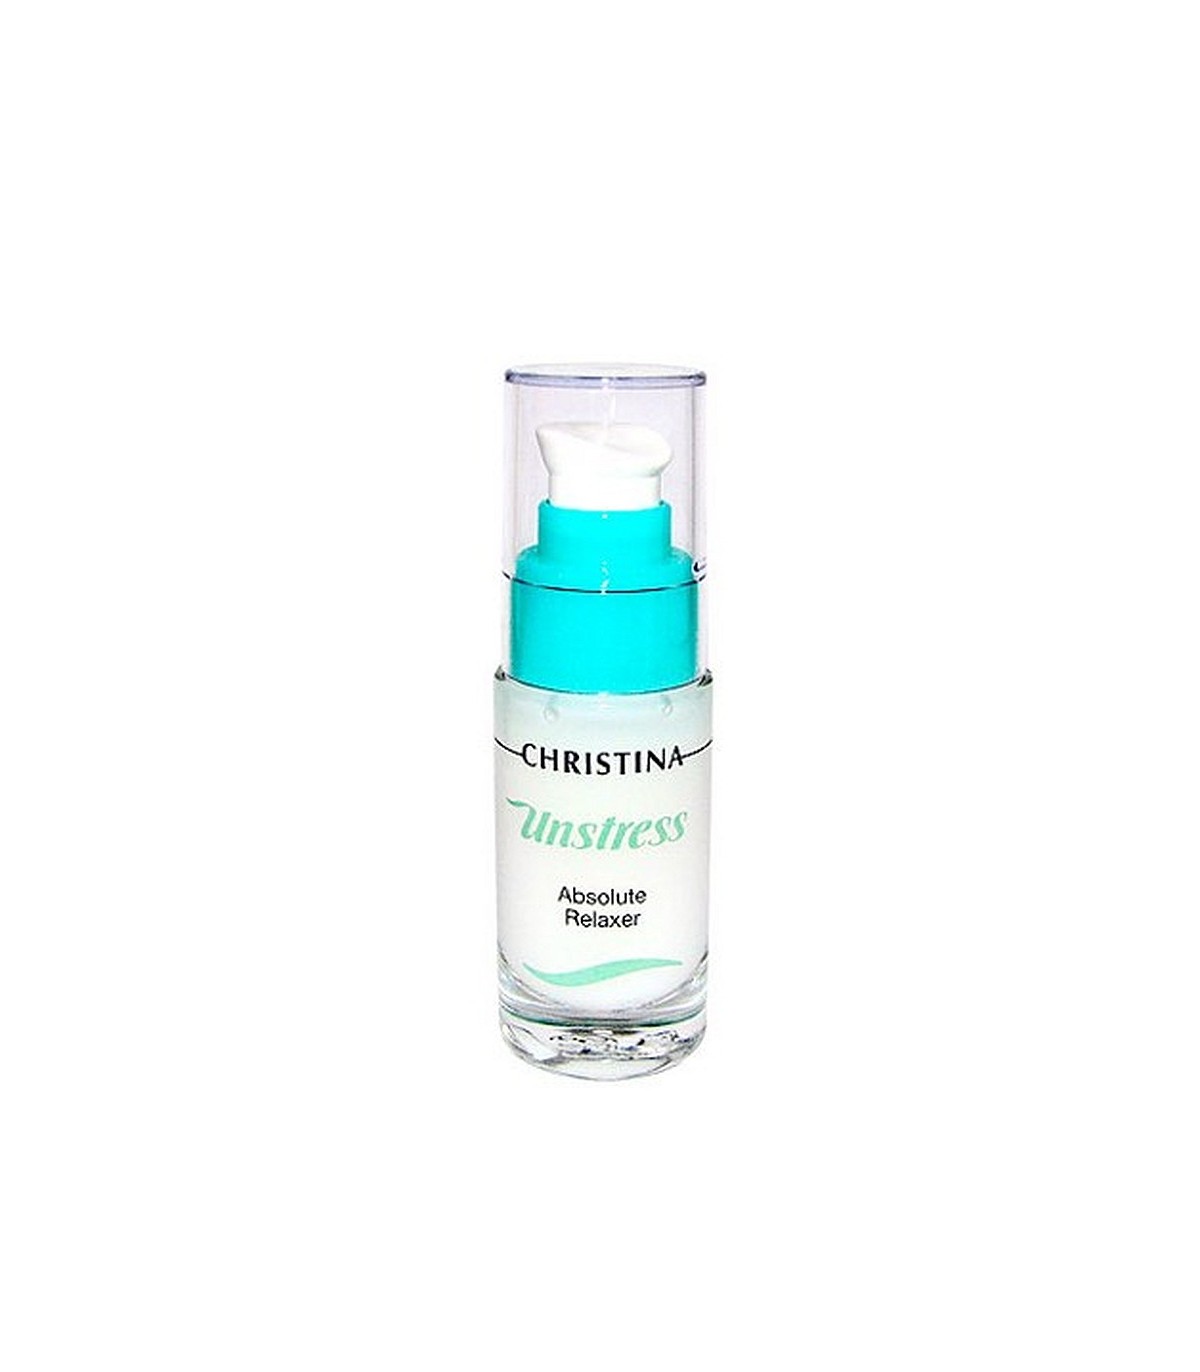 Absolute Relaxer - 30 ml - Serie Unstress - Christina